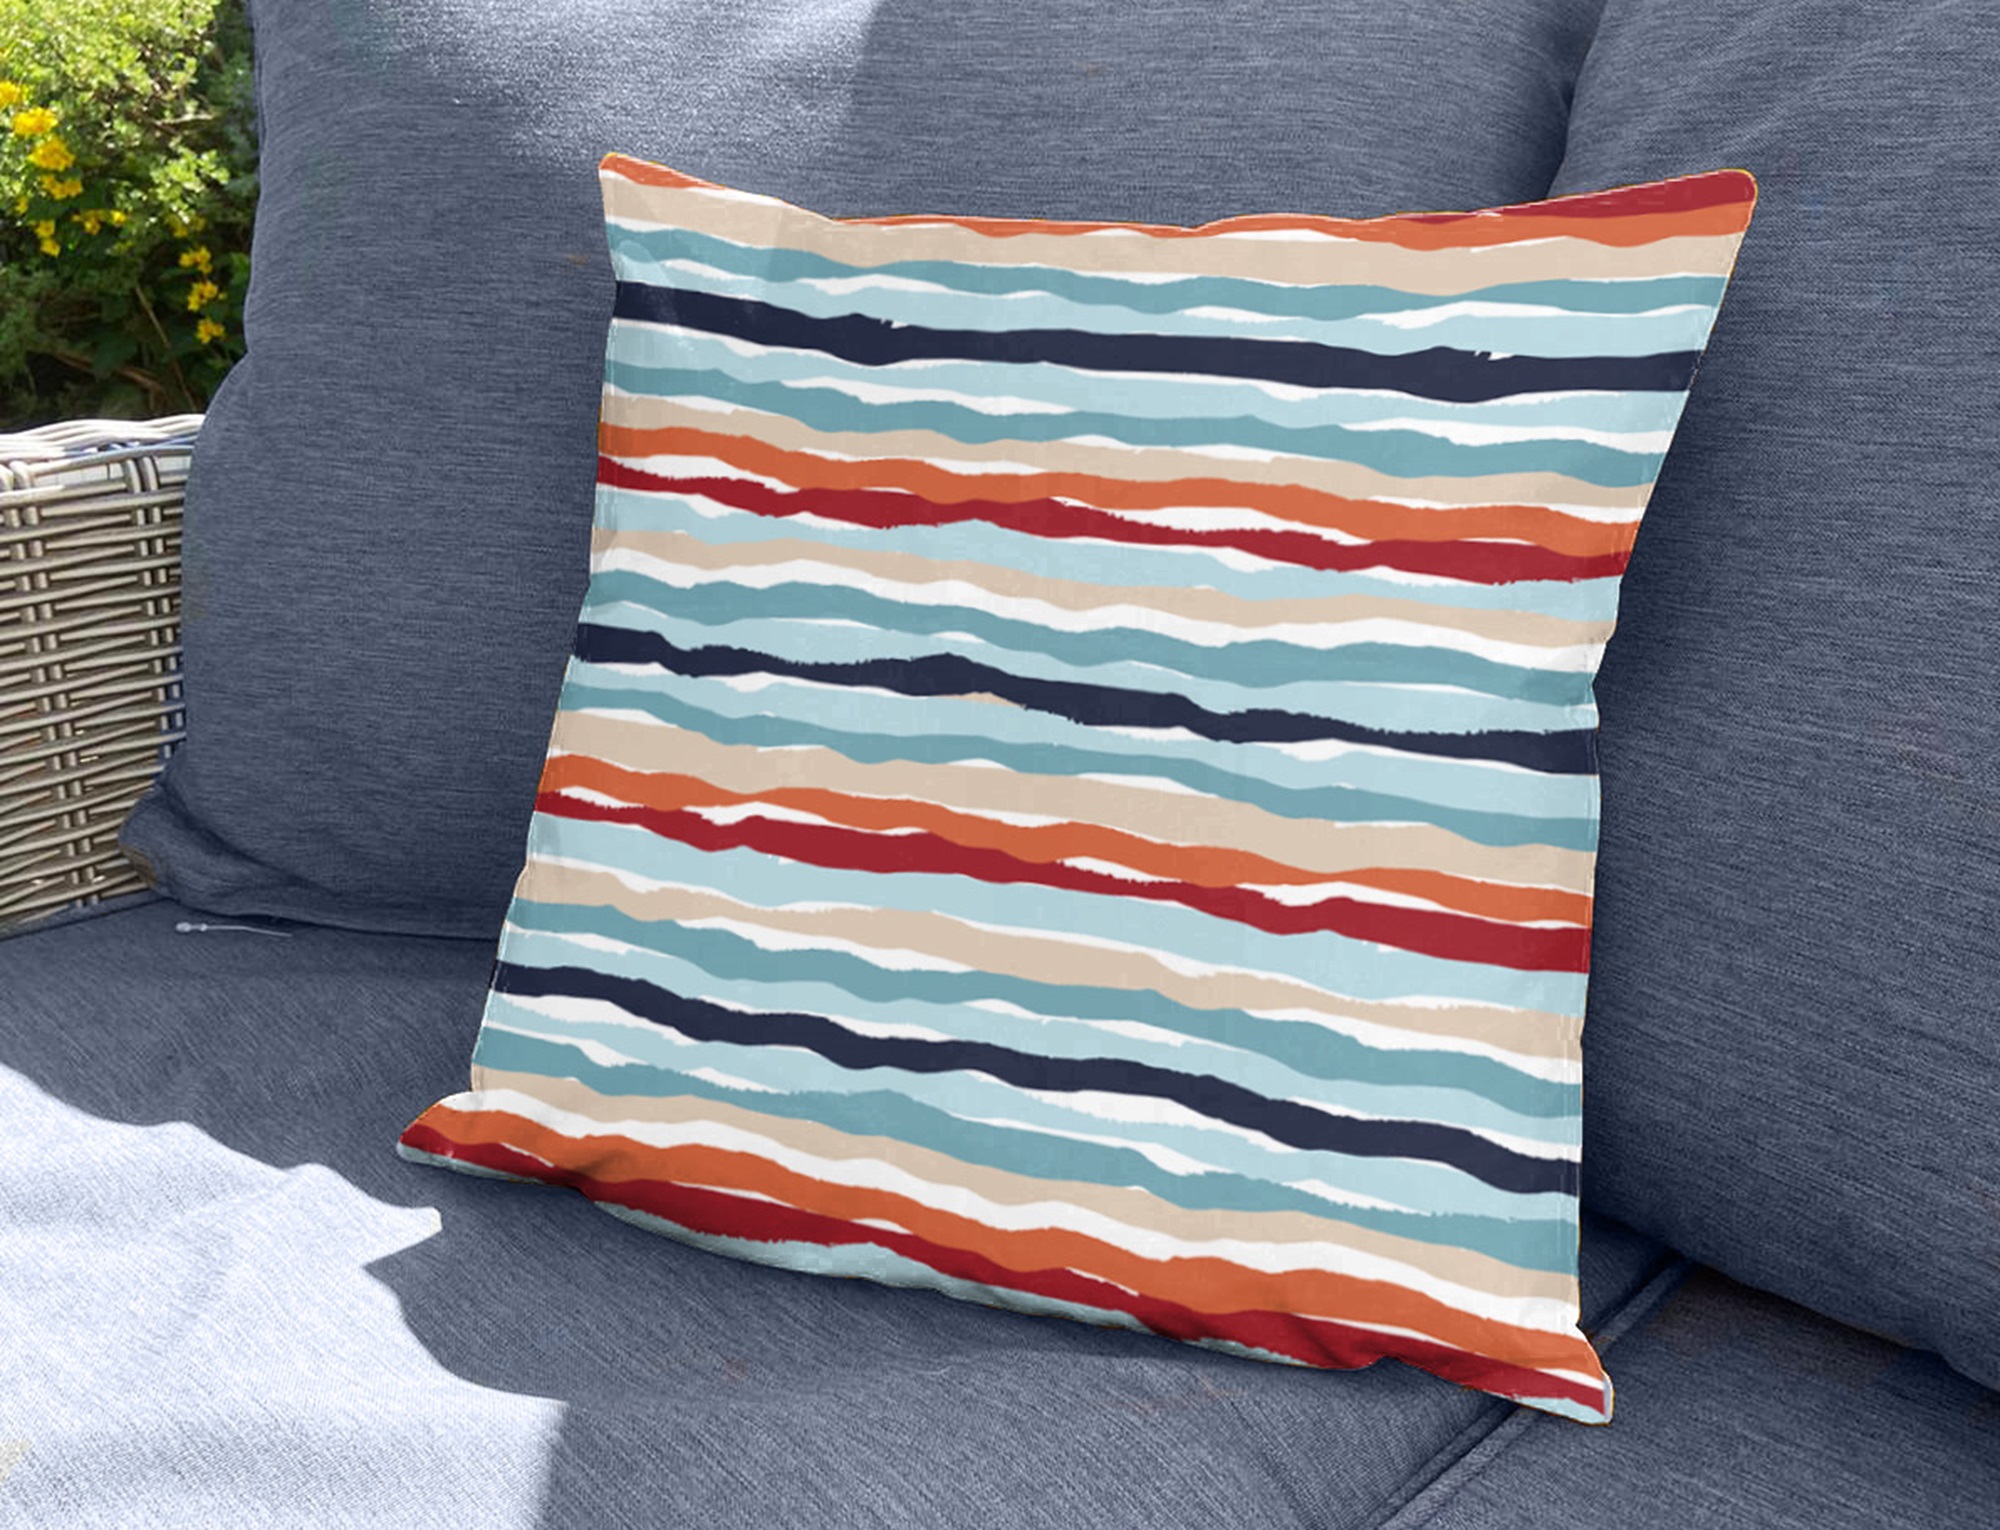 rucomfy launch new collection of outdoor cushions